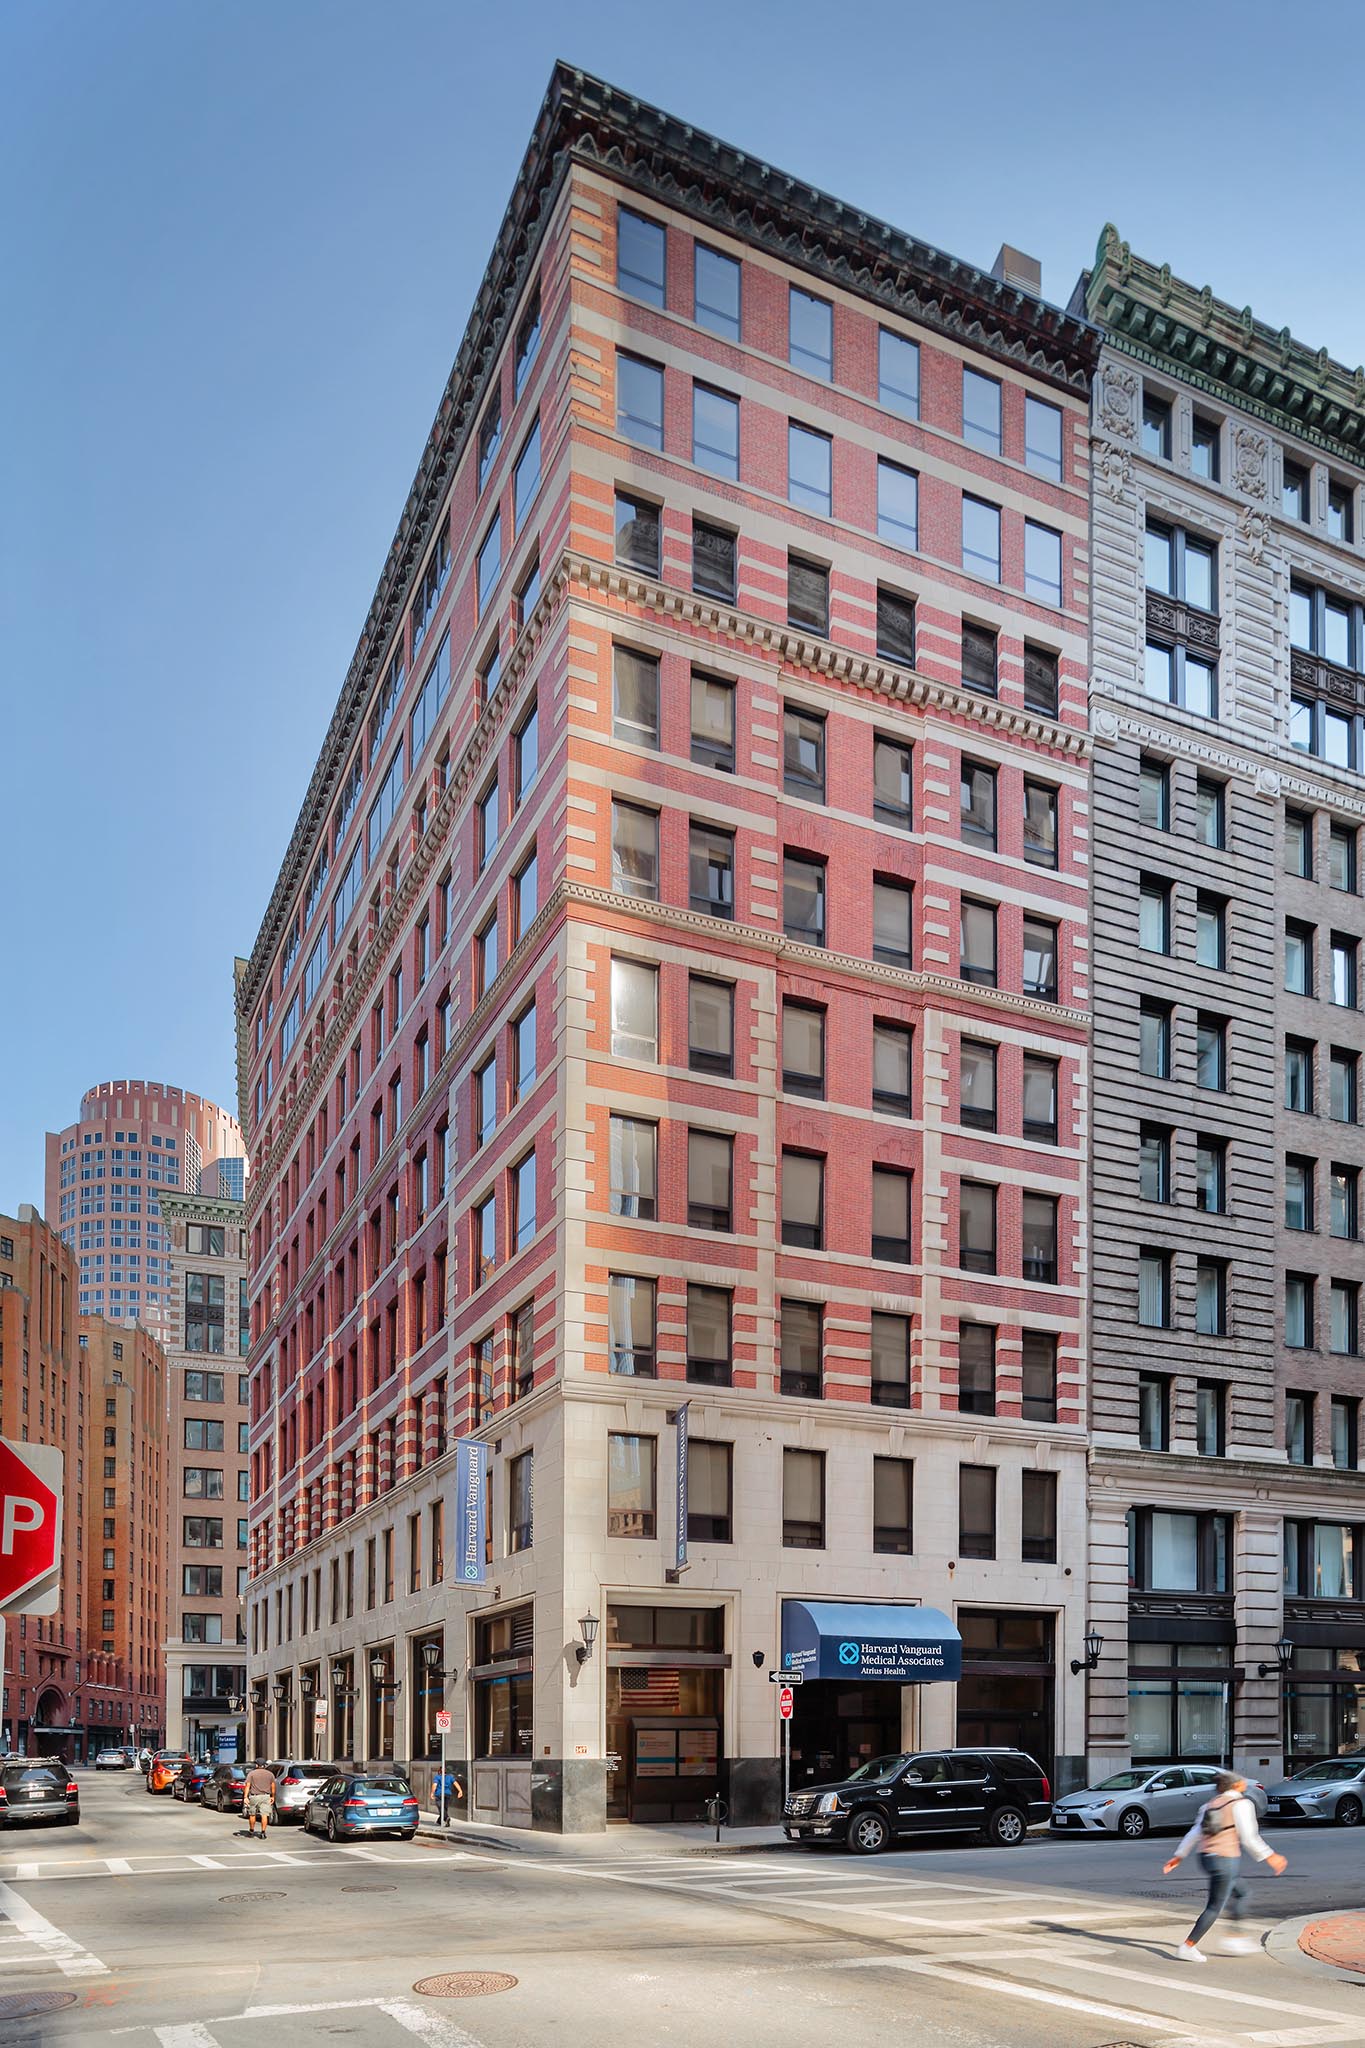 News Release: Newmark Completes Sale of 147 Milk Street in Downtown Boston,  Massachusetts